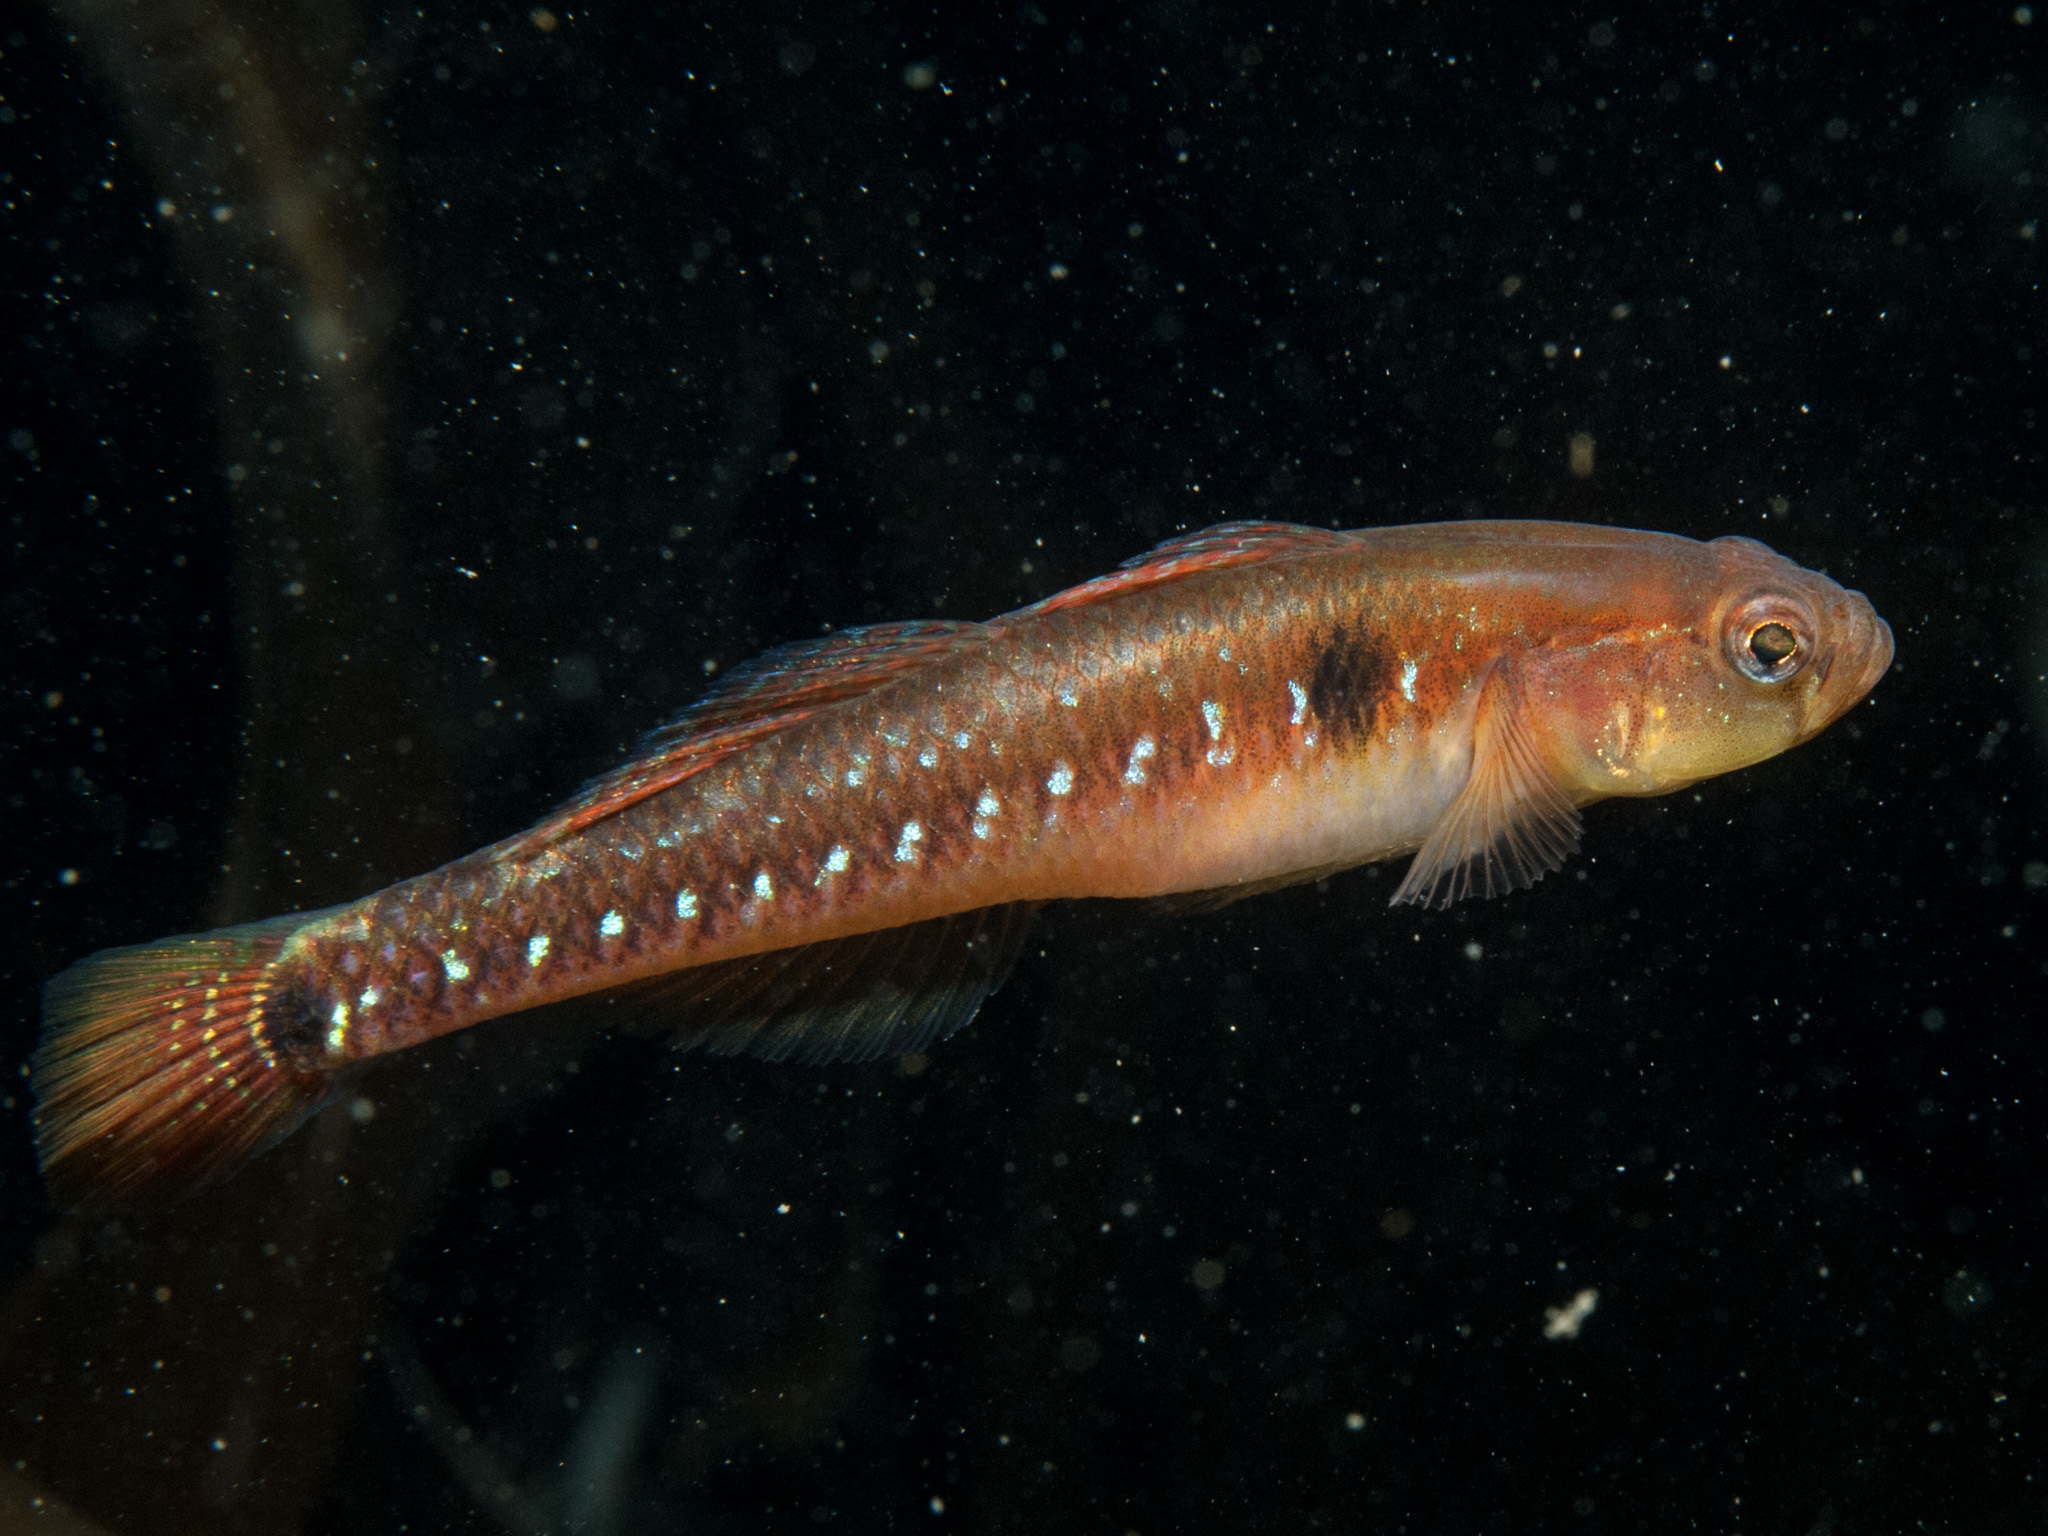 image of Pomatoschistus flavescens (Two-spotted goby)